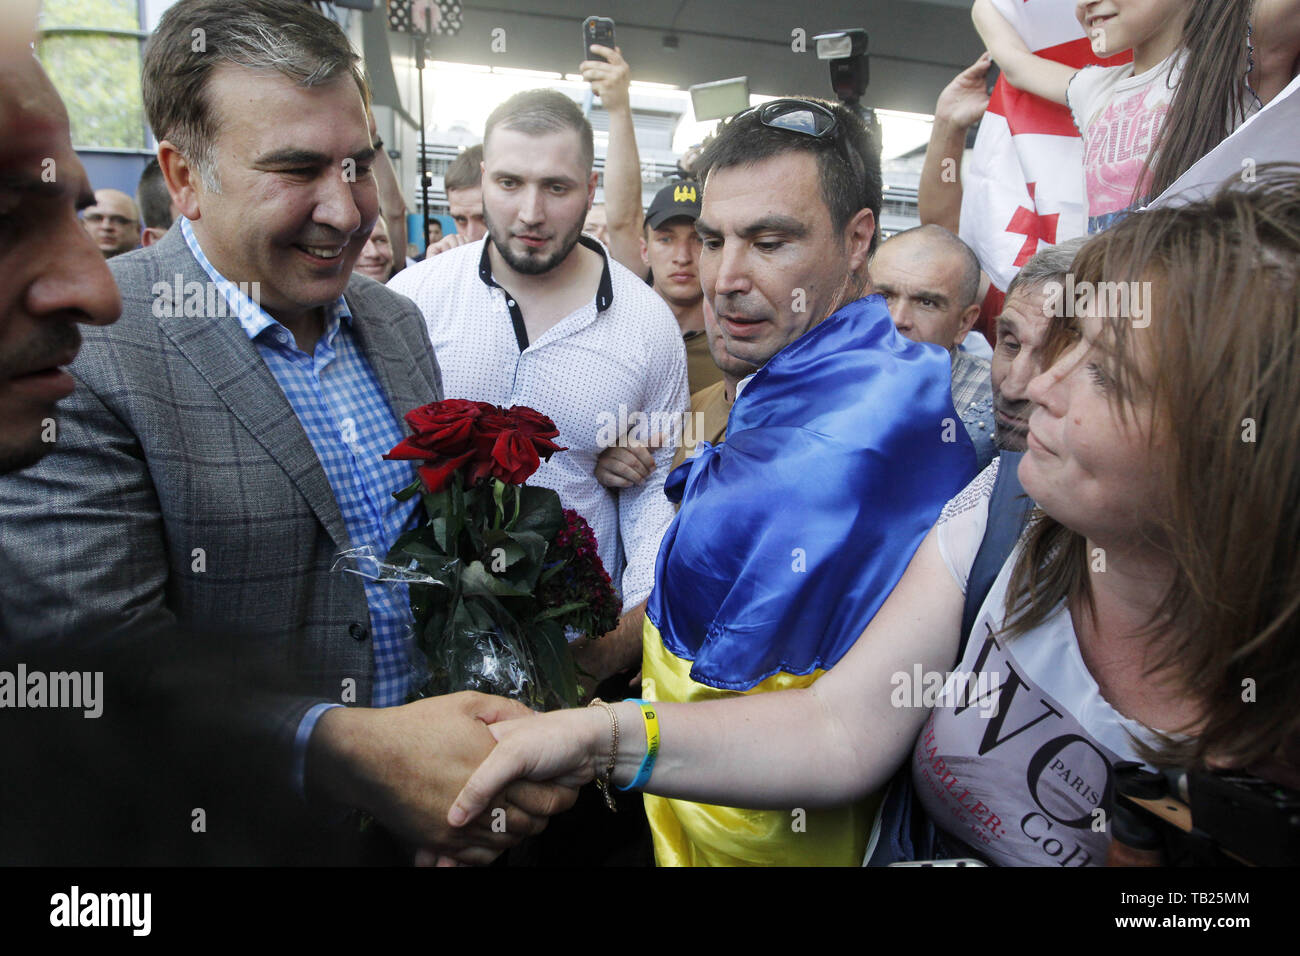 May 29, 2019 - Kiev, Ukraine - Former Georgian president and ex-Odessa Governor MIKHEIL SAAKASHVILI (L) greets his supporters, as he arrives to the Boryspil international airport near Kiev, Ukraine, on 29 May 2019. Saakashvili returned to Ukraine after Ukrainian President Volodymyr Zelensky has reinstated Mikheil Saakashvili's Ukrainian citizenship on 28 May 2019. Zelensky deleted the respective provision from his predecessor Petro Poroshenko's No. 196 order dated July 26, 2017, the UNIAN inform agency reported. Ukrainian opposition leader Mikheil Saakashvili was deported to Poland on 12 Febru Stock Photo